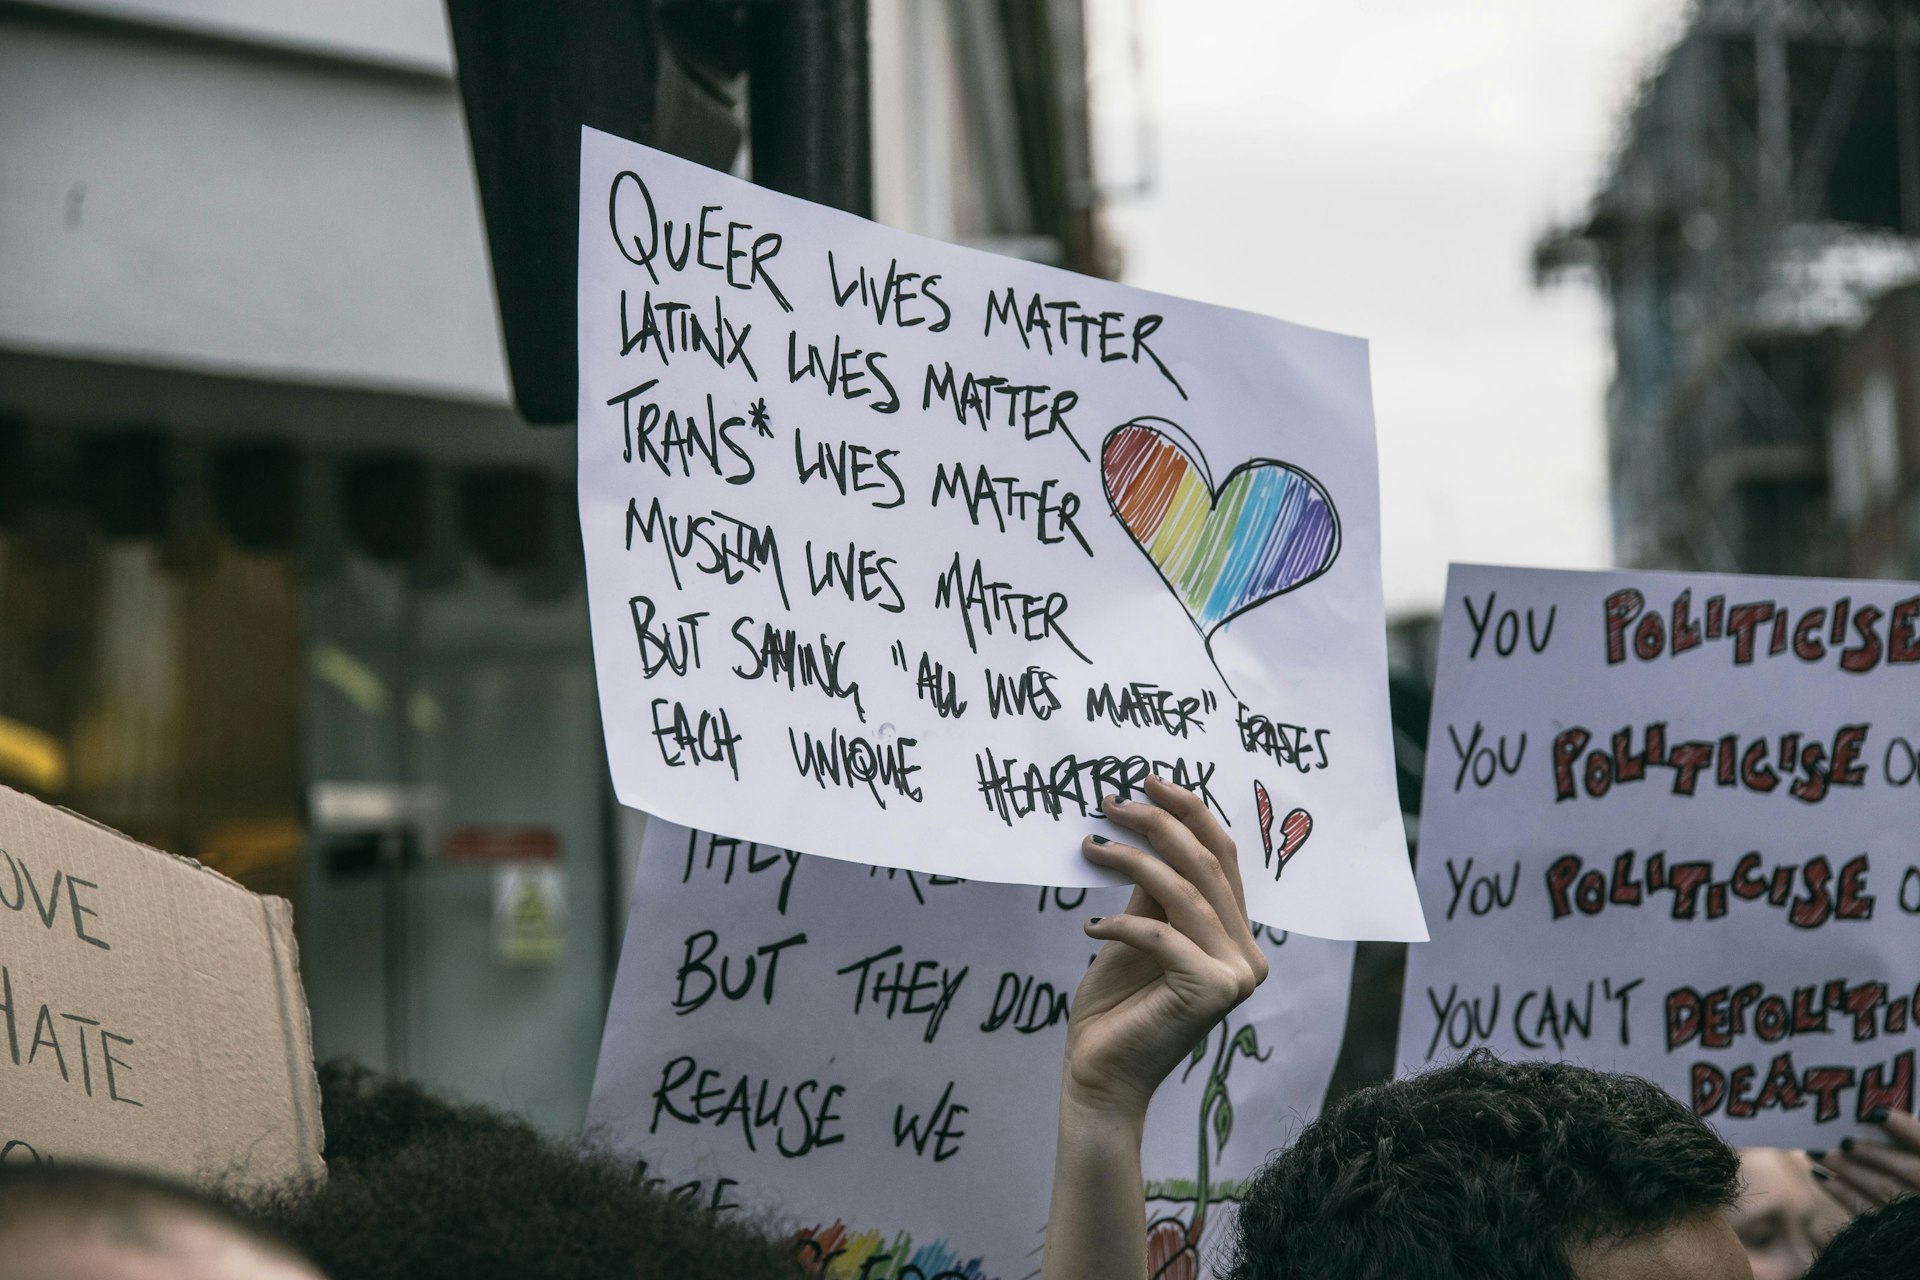 We Cry Real Tears: As LGBT people, we're still fighting for our safe havens